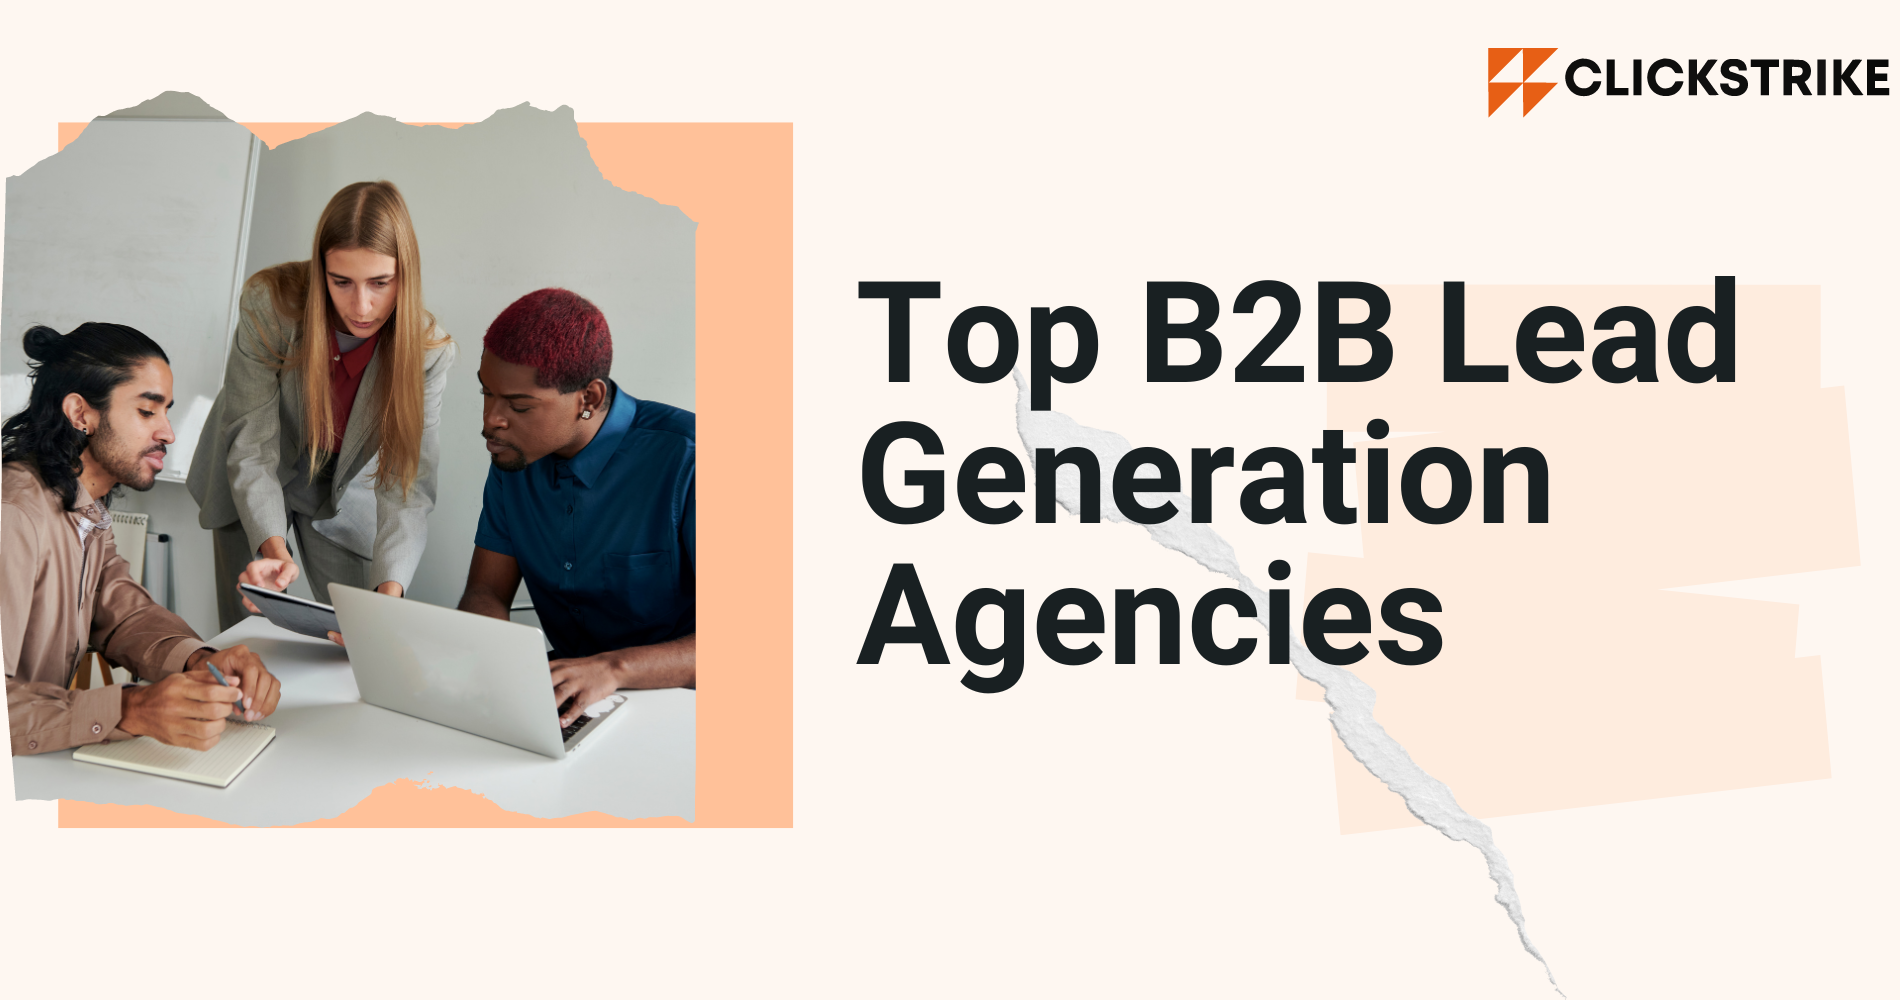 6 Best Lead Generation Companies & Services In 2023 | Clickstrike